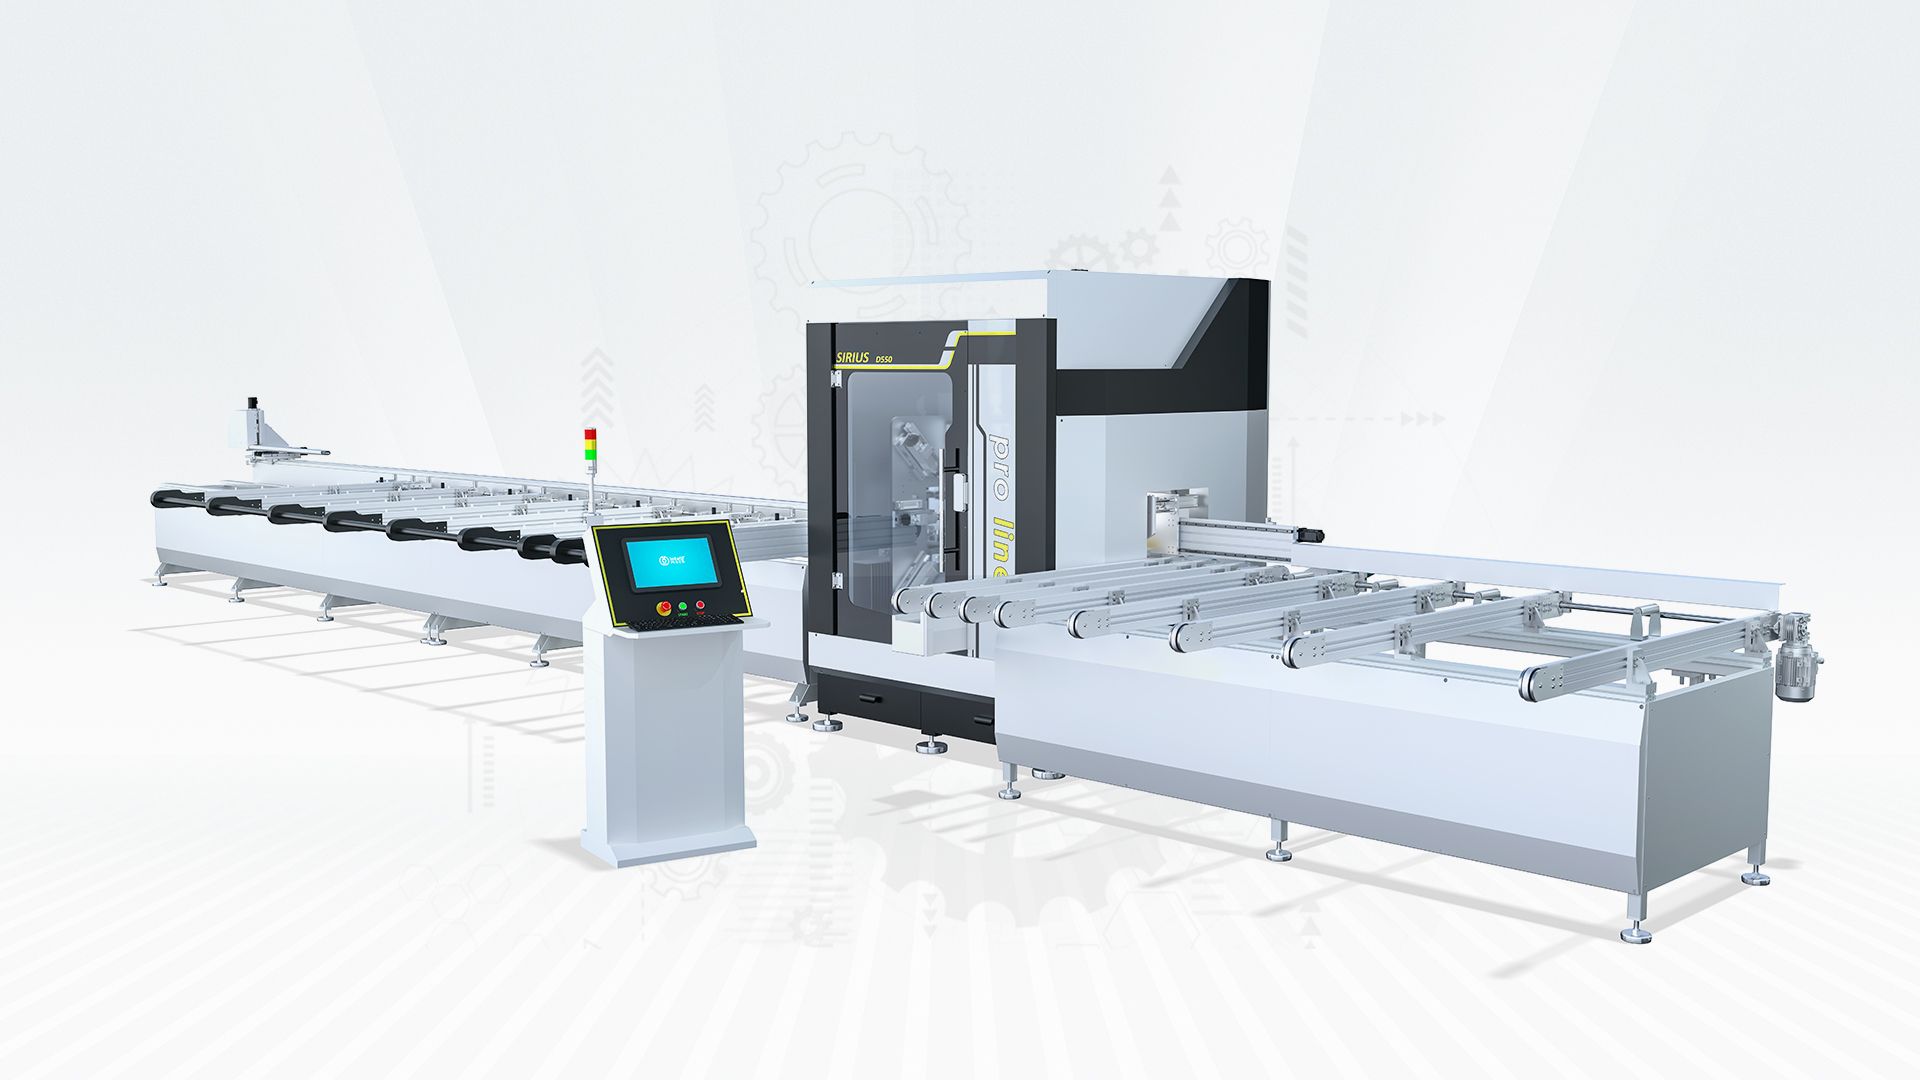 PVC PRODUCTION CENTERS - Pvc Profile Machining and Cutting Center